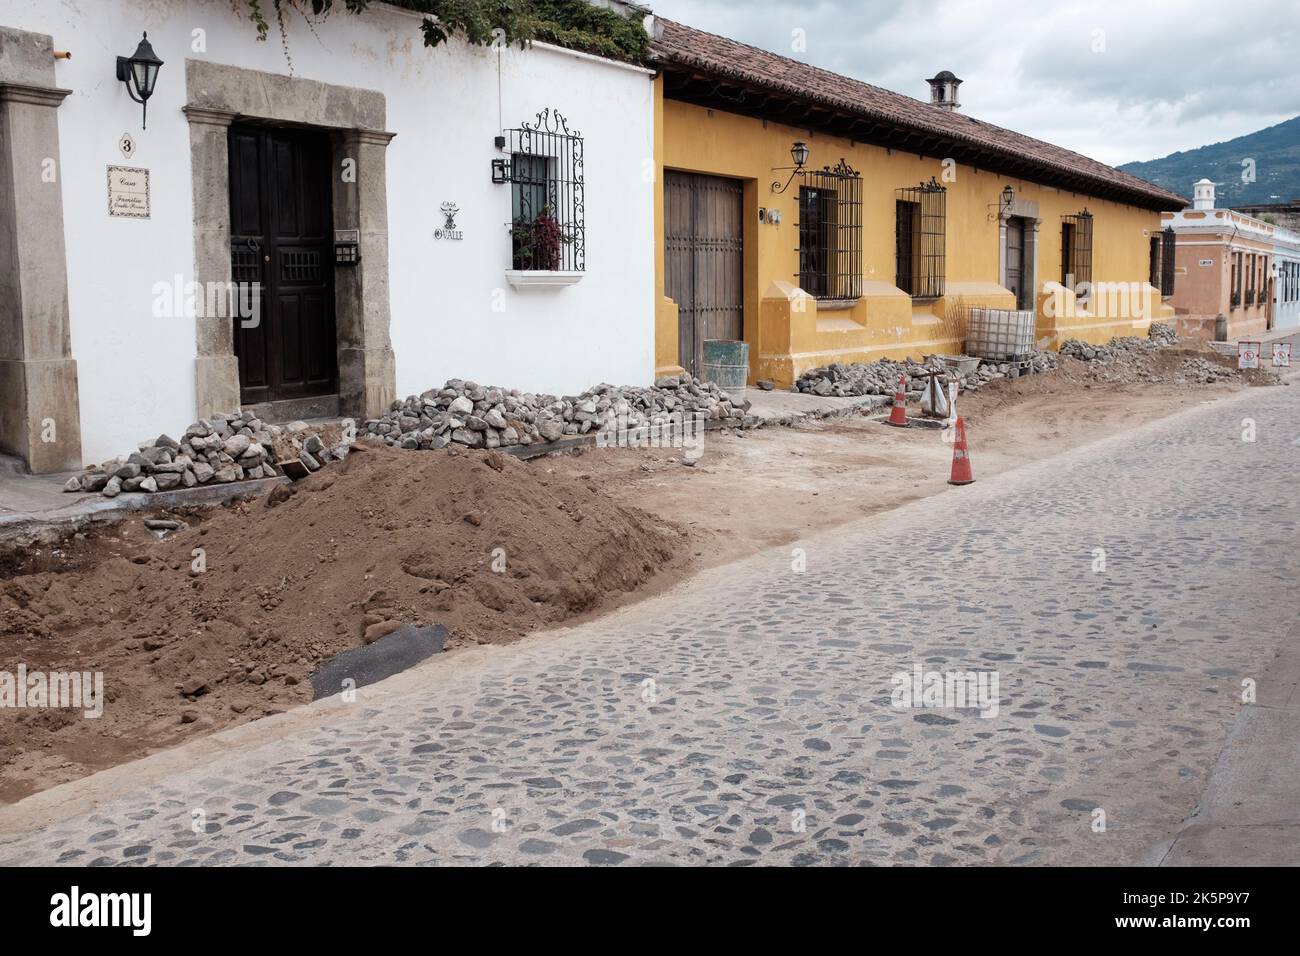 The famous cobblestone streets of Antigua Guatemala, Guatemala being renovated. Antigua's colonial architecture can be appreciated. Stock Photo